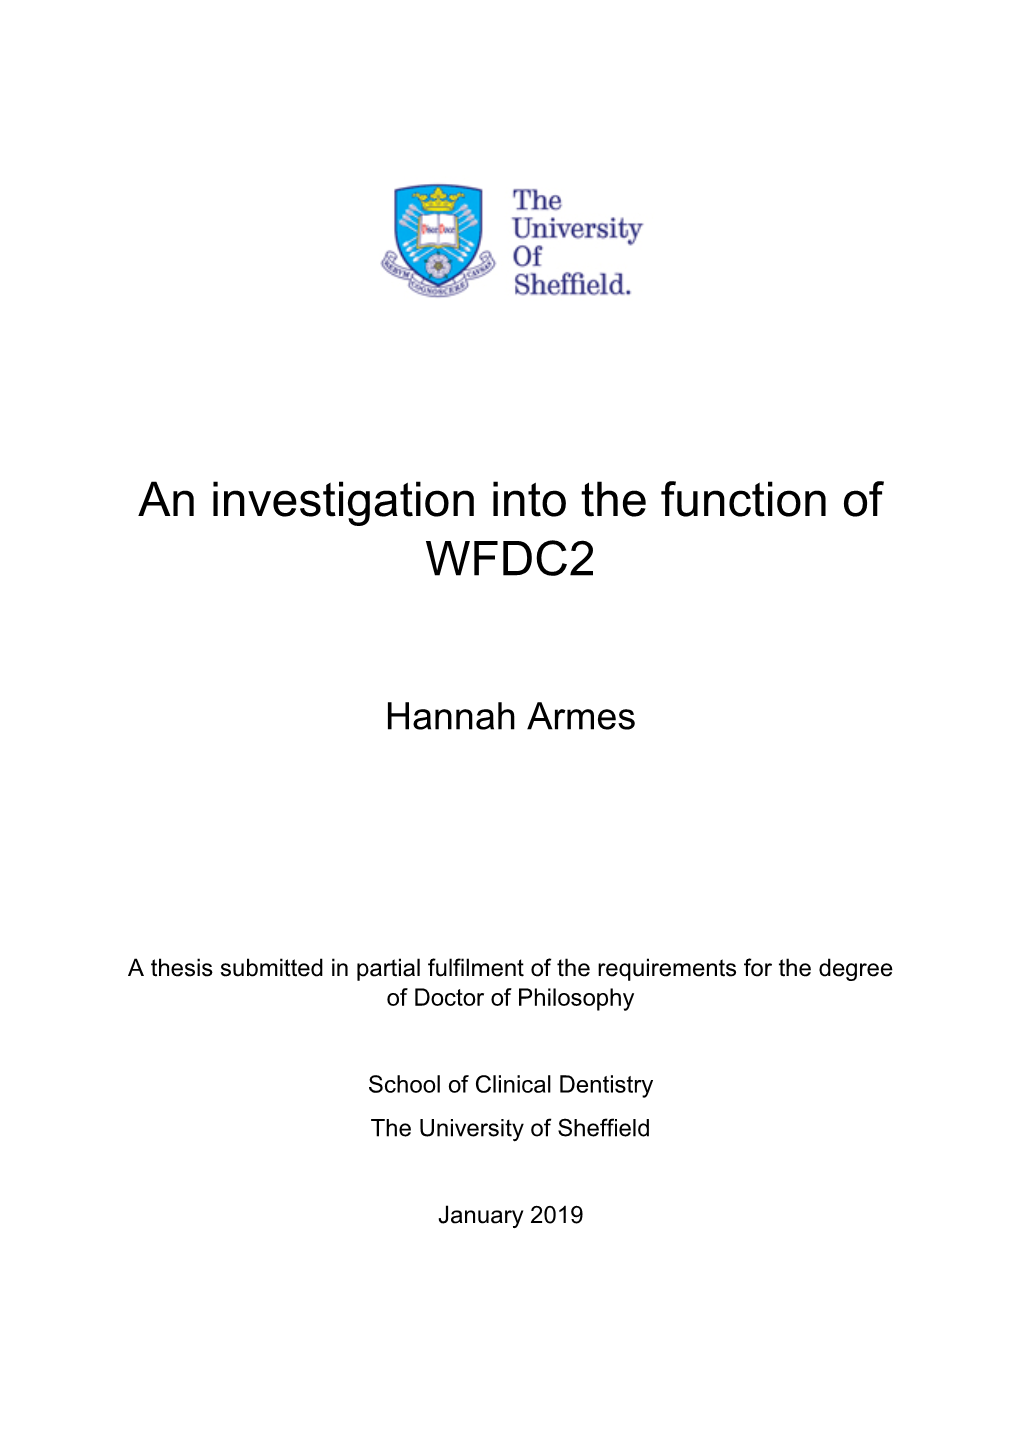 An Investigation Into the Function of WFDC2